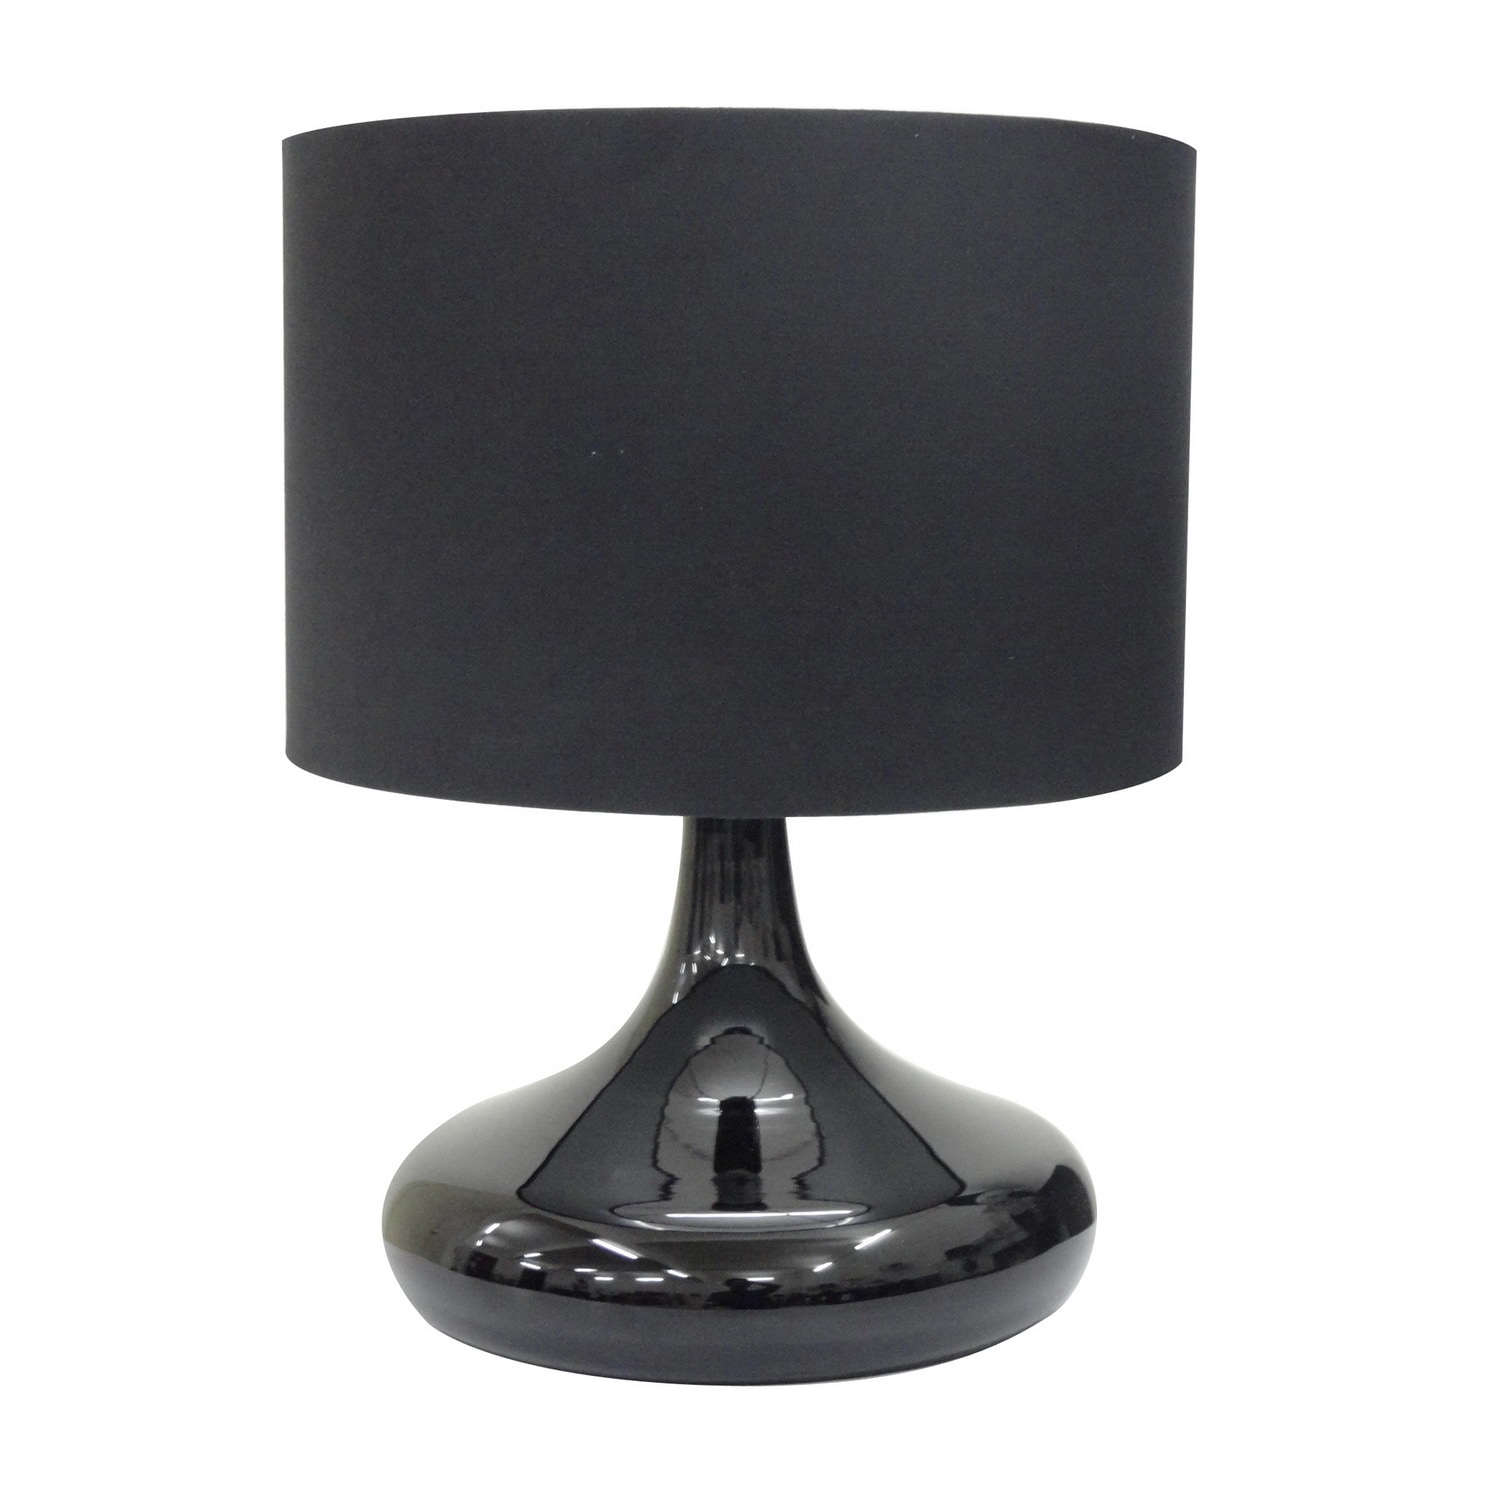 Integrity 16.5 inch Black Opal Glass Table Lamp with Black Shade Today